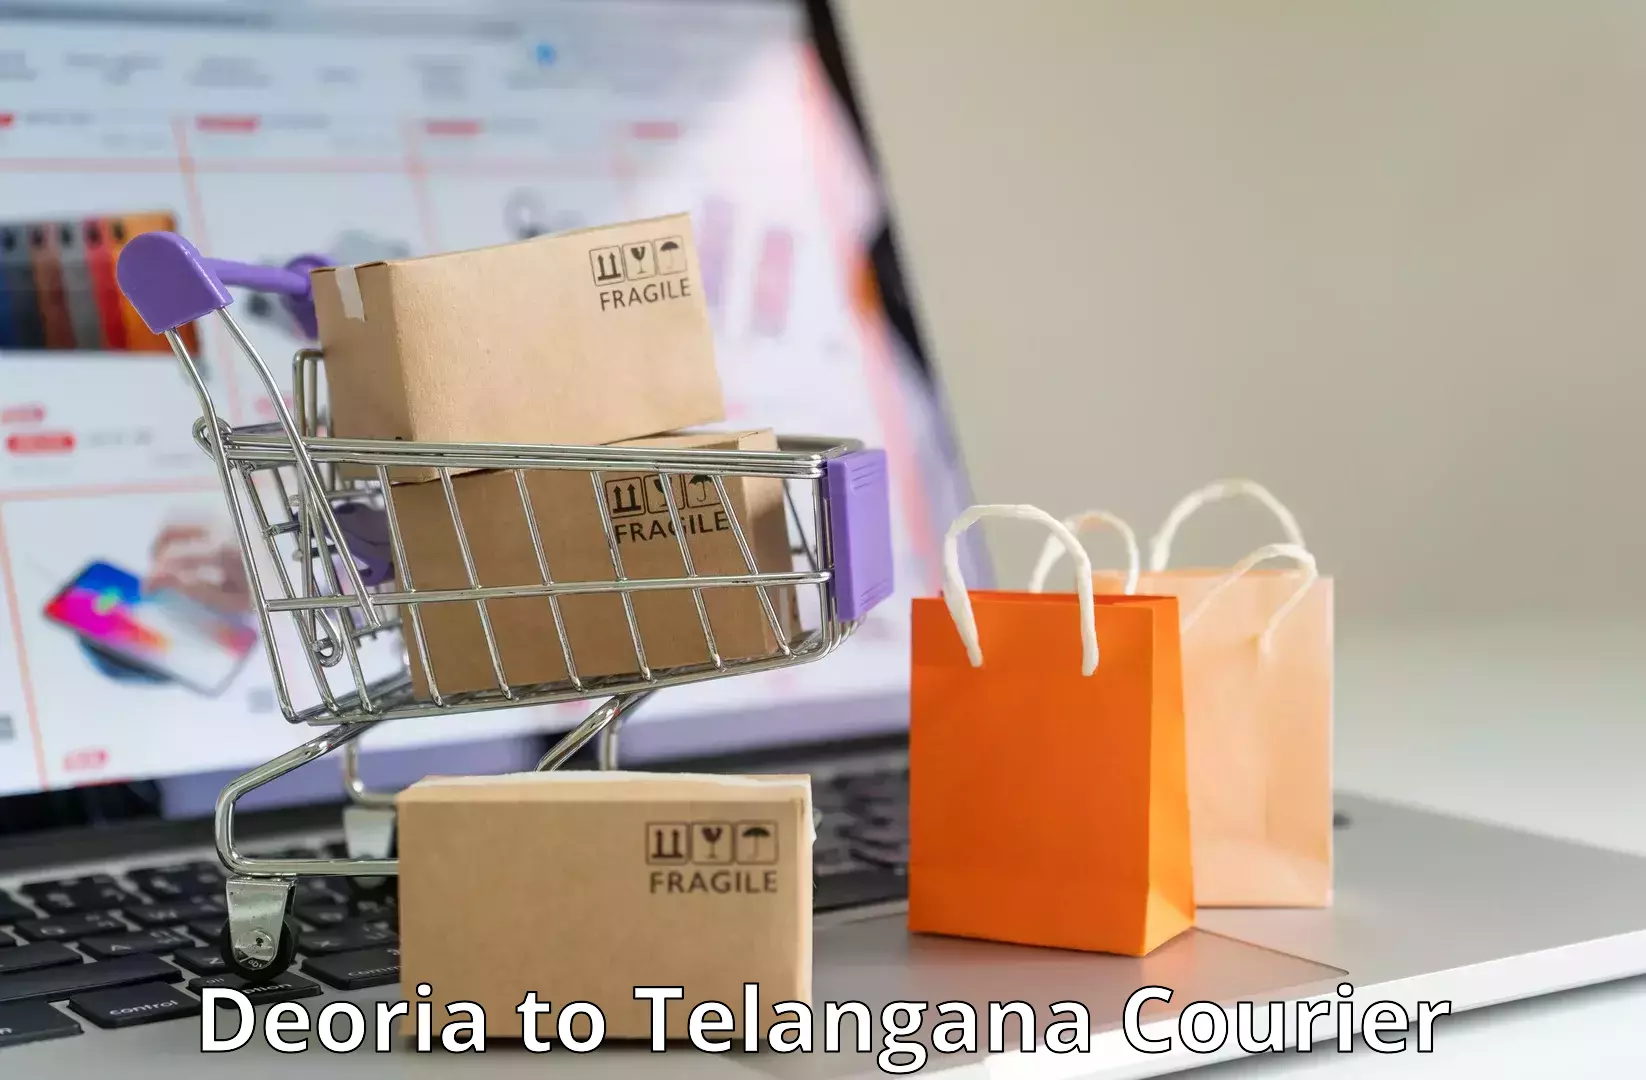 Modern courier technology Deoria to Rudrangi